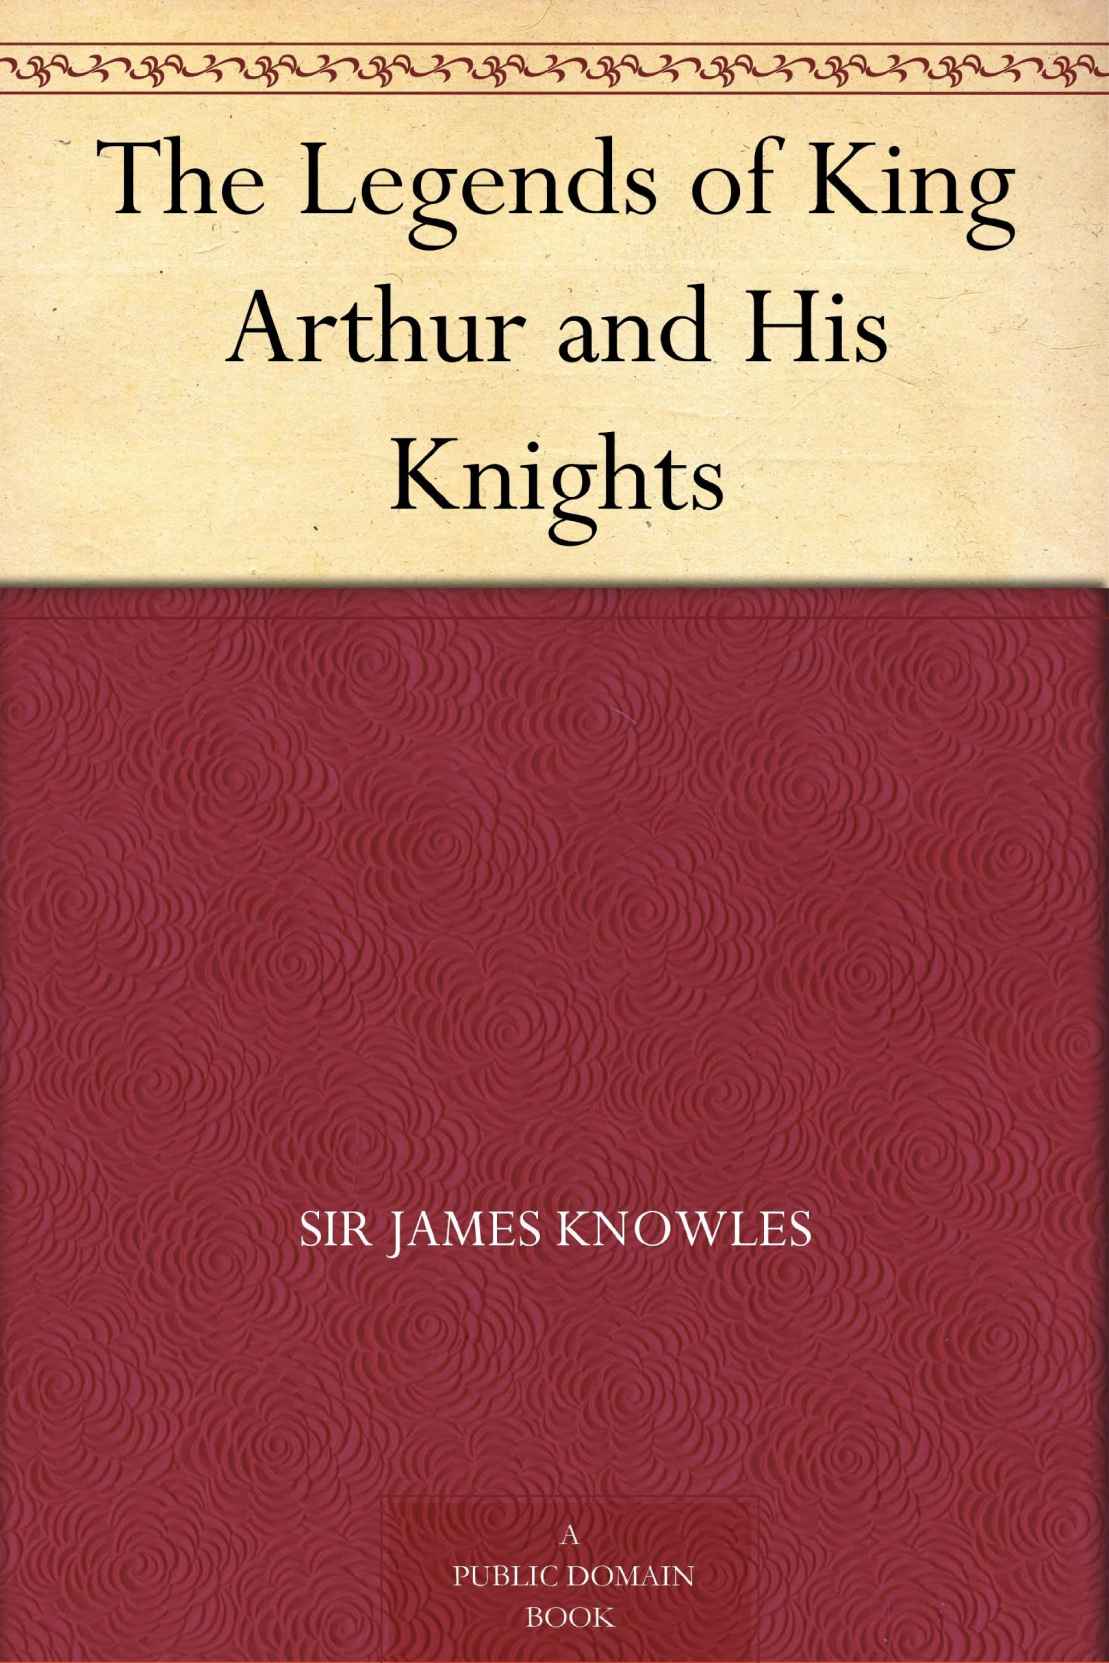 The Legends of King Arthur and His Knights.jpg